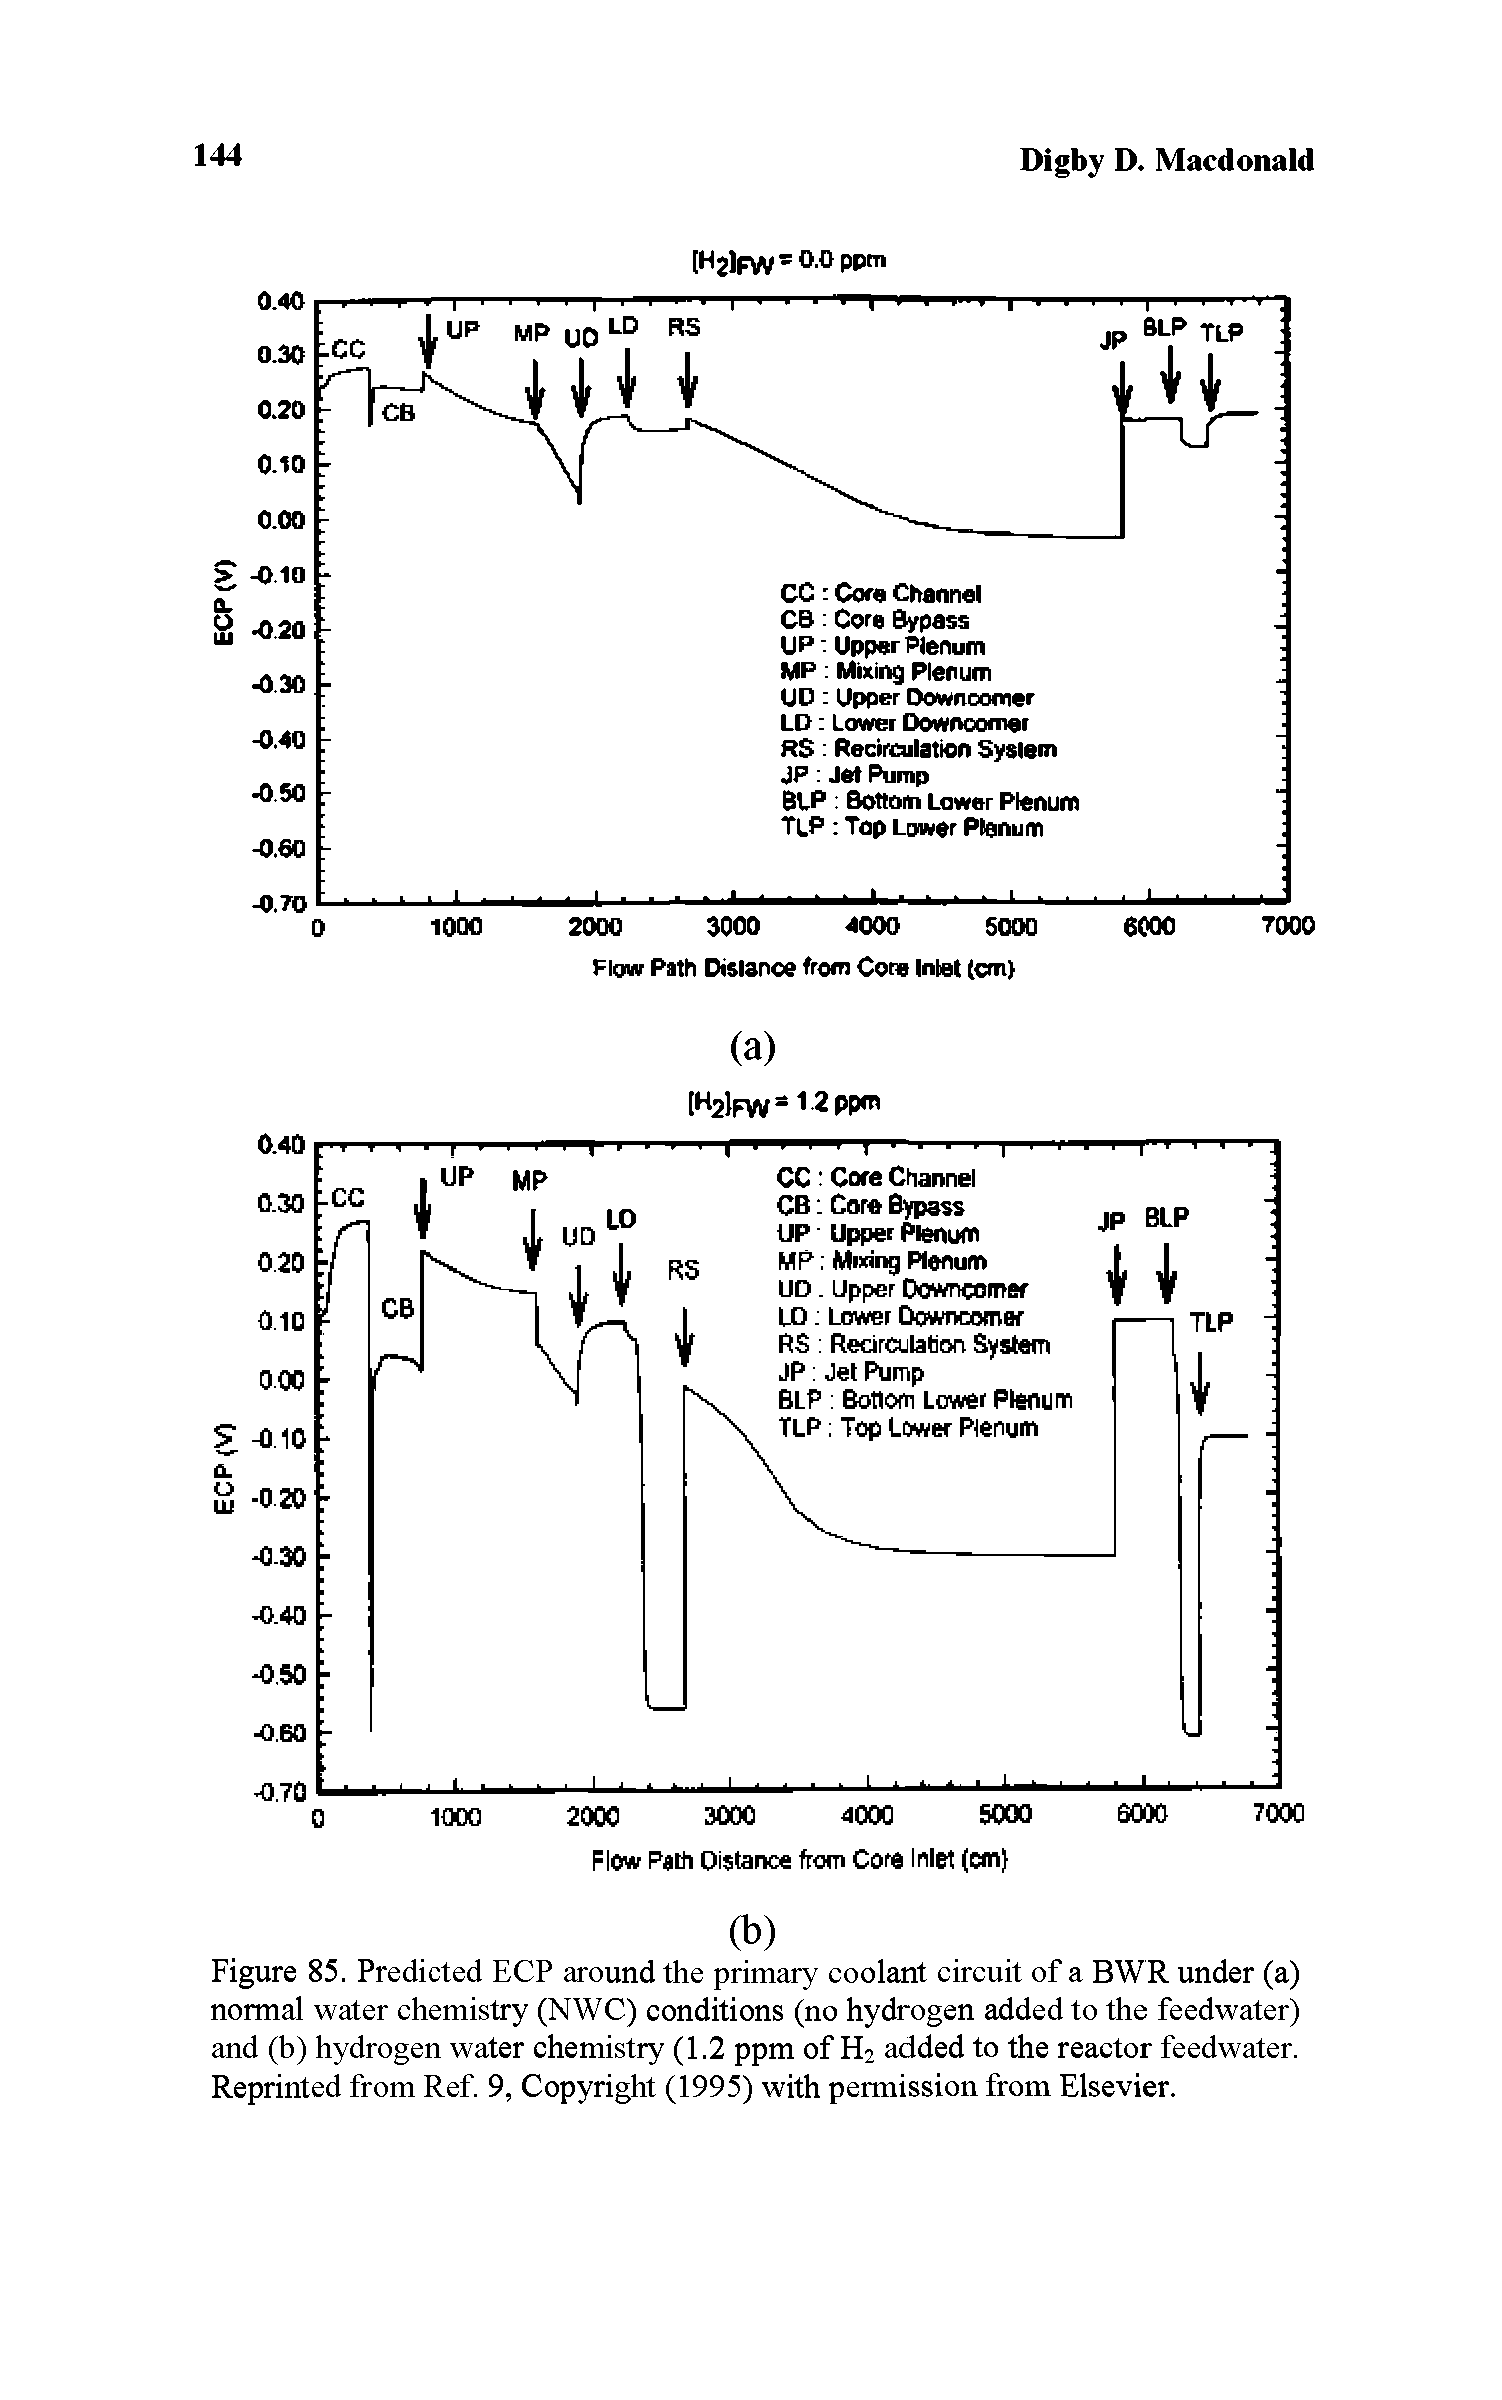 Figure 85. Predicted ECP around the primary coolant circuit of a BWR under (a) normal water chemistry (NWC) conditions (no hydrogen added to the feedwater) and (h) hydrogen water chemistry (1.2 ppm of H2 added to the reactor feedwater. Reprinted from Ref. 9, Copyright (1995) with permission from Elsevier.